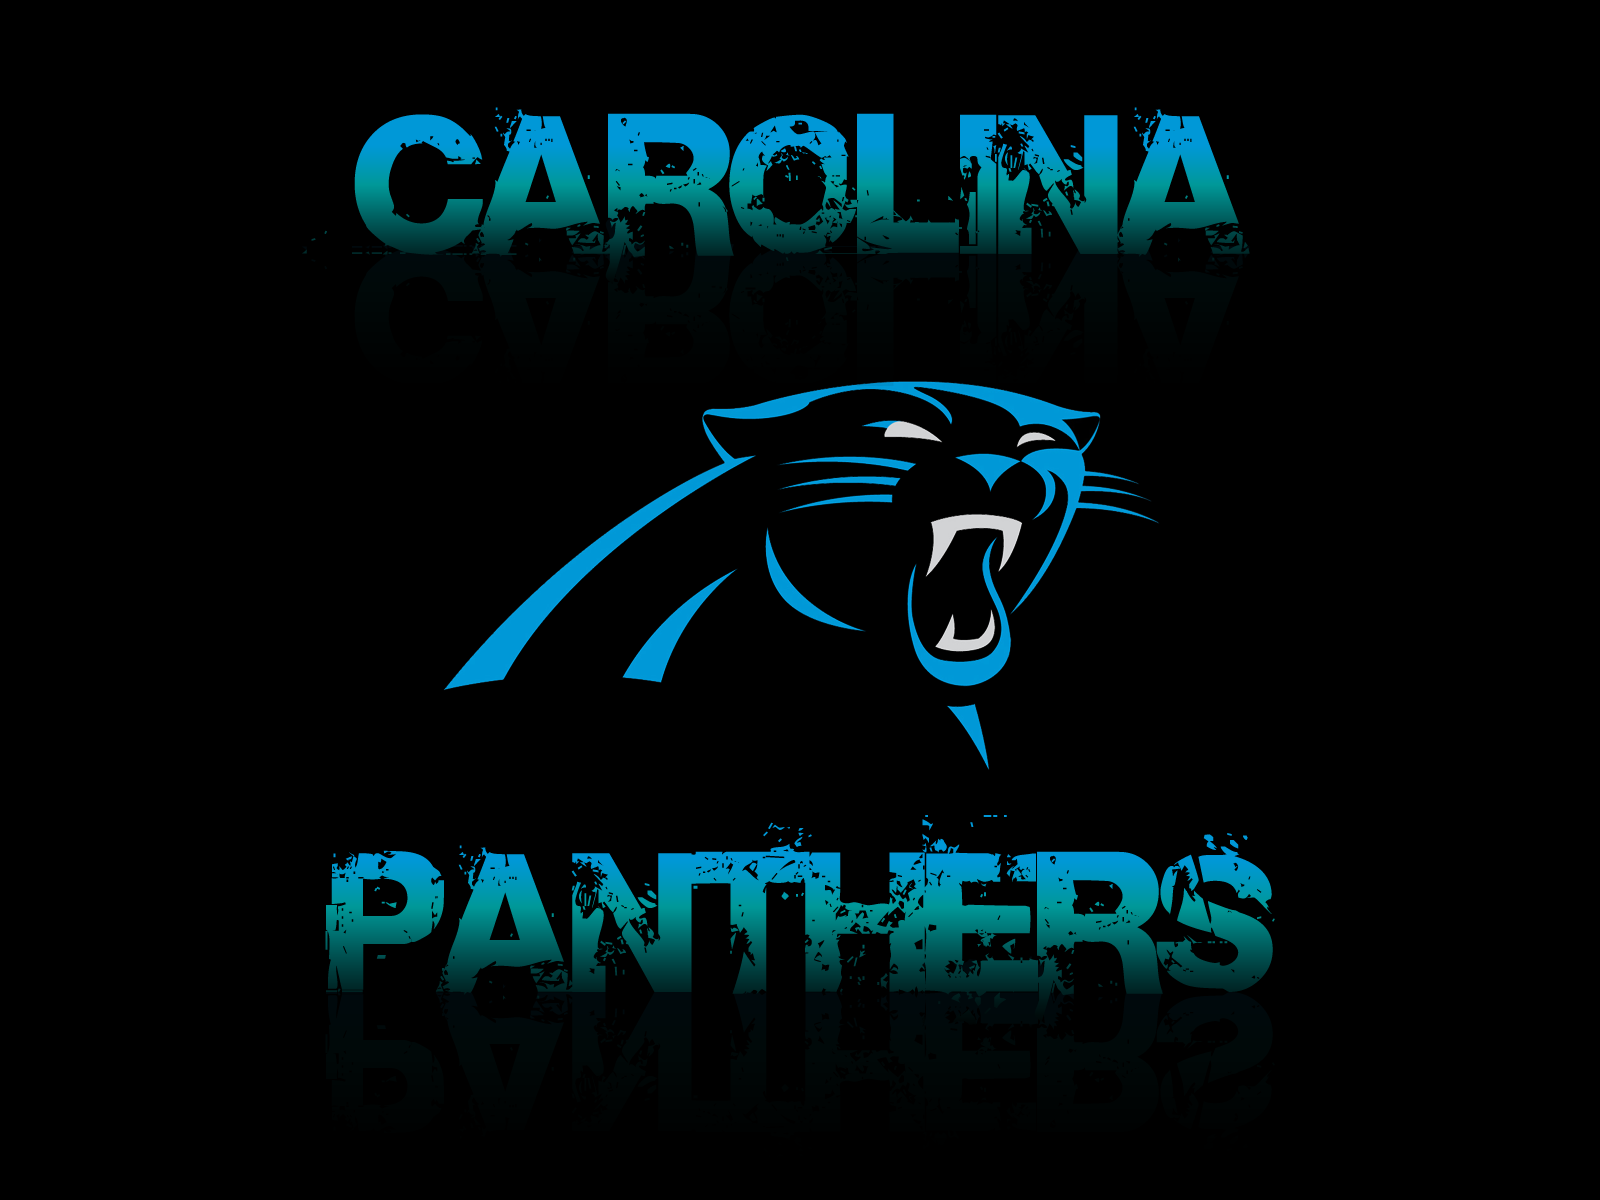 Carolina Panthers Dark Wallpaper for Phones and Tablets